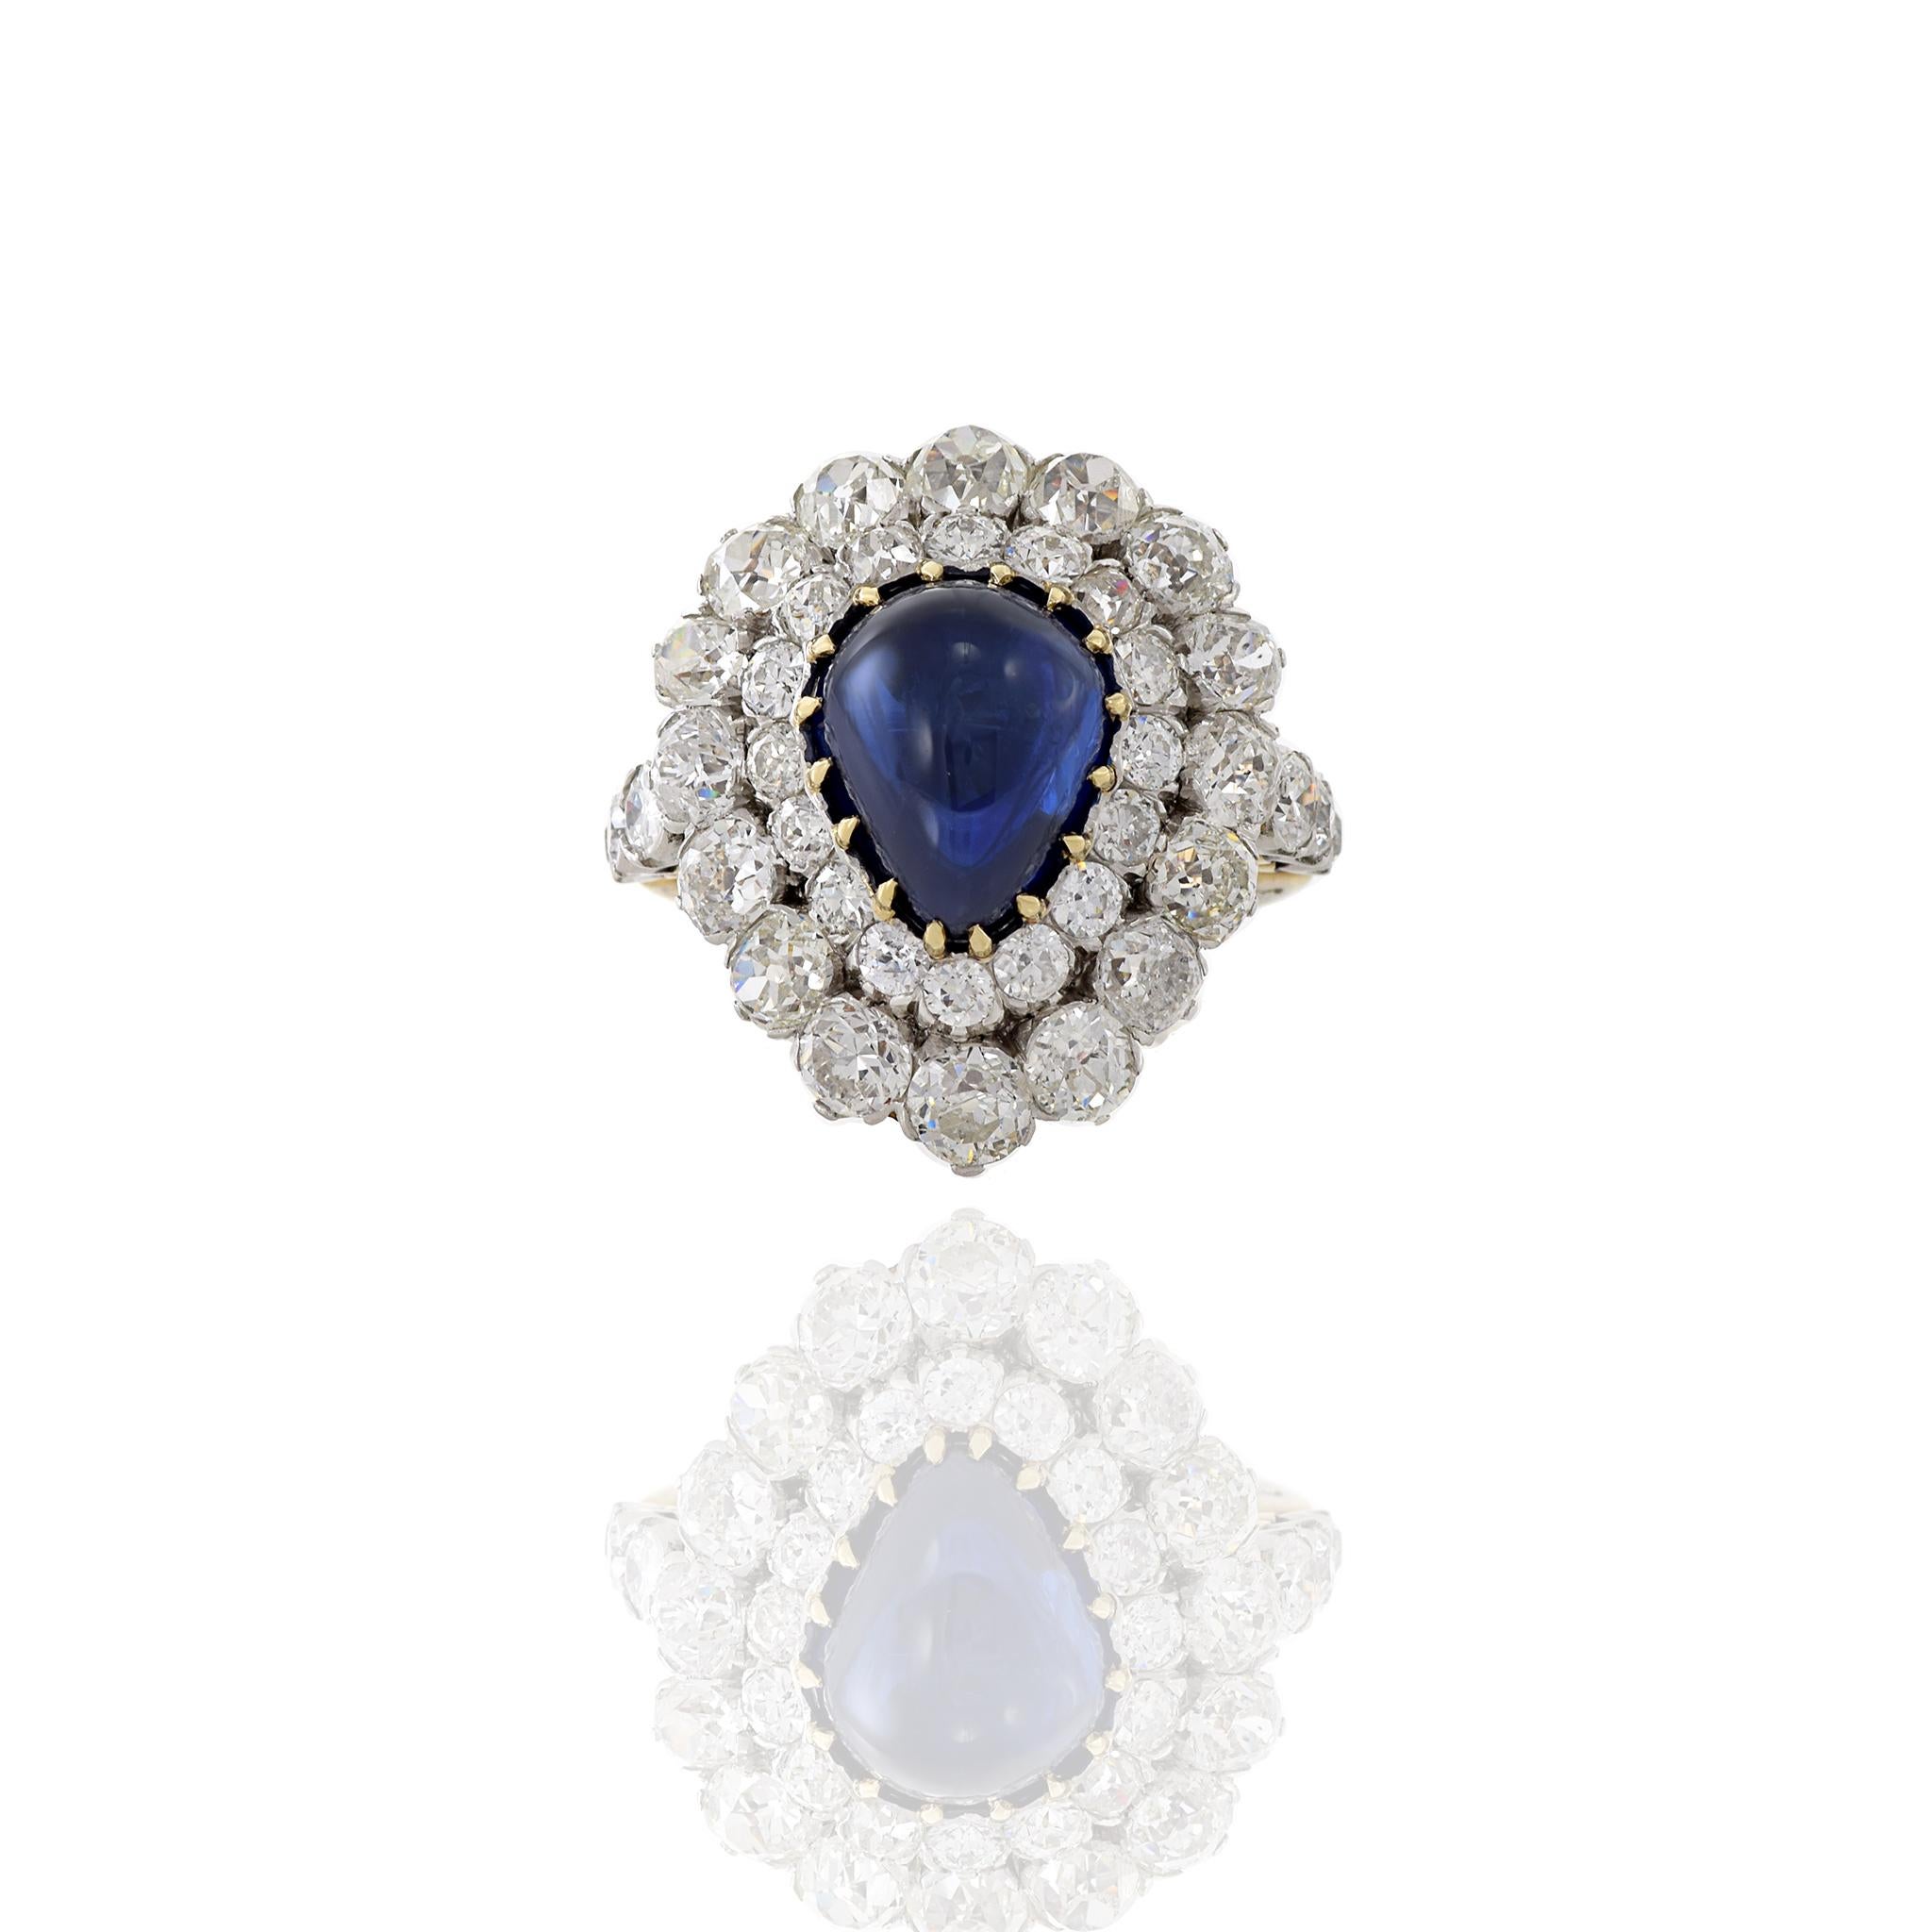 This Estate piece from the Victorian Era is set in 18KT yellow gold and platinum featuring a Blue Sapphire and diamonds. A cocktail ring consisting of one pear shaped cabochon genuine blue sapphire weighing 8.50CT surrounded by 5.30CT-TW old